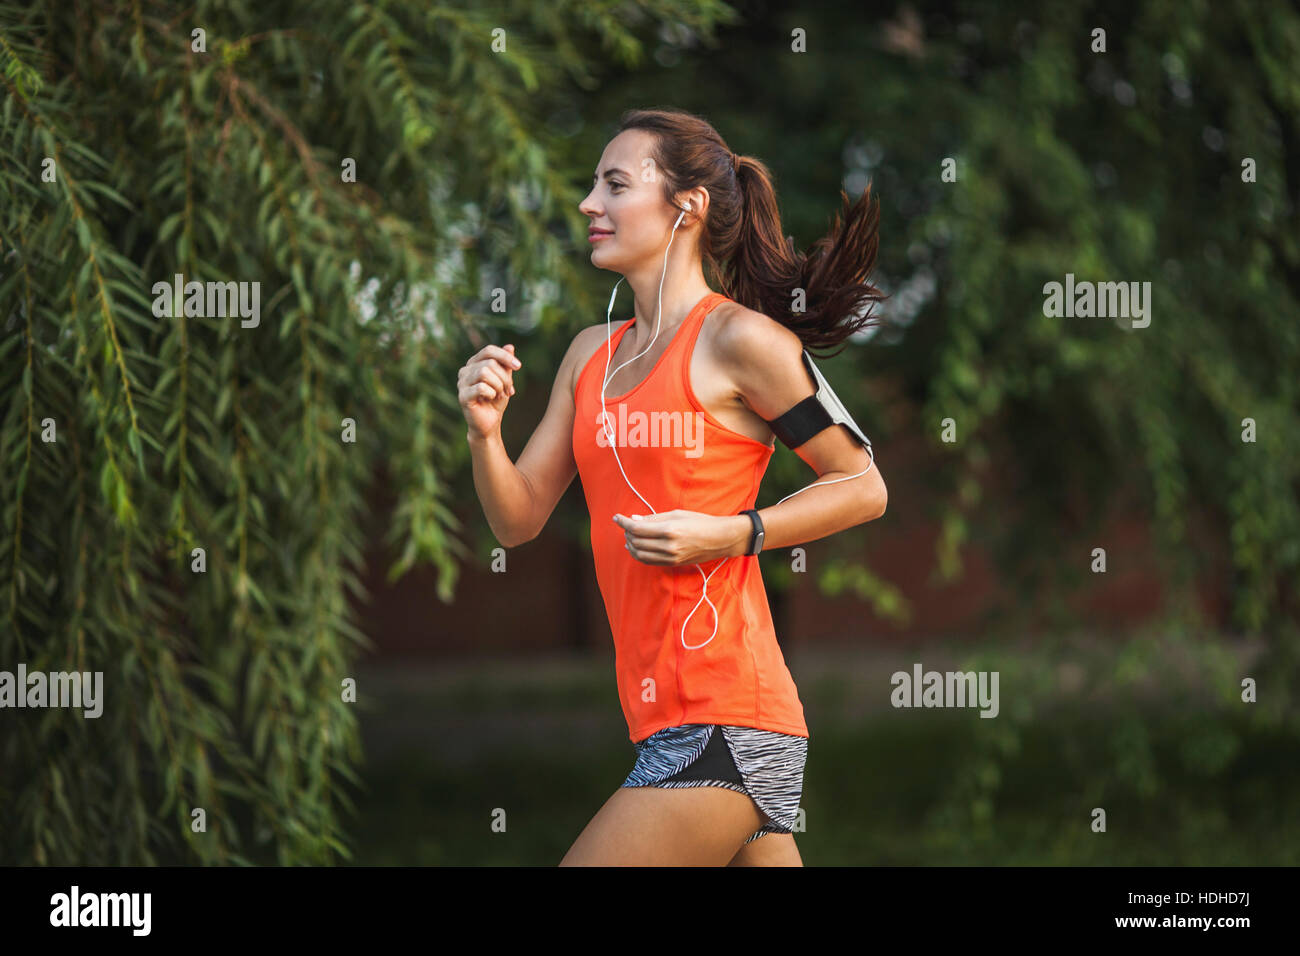 Side view of woman jogging at park Stock Photo